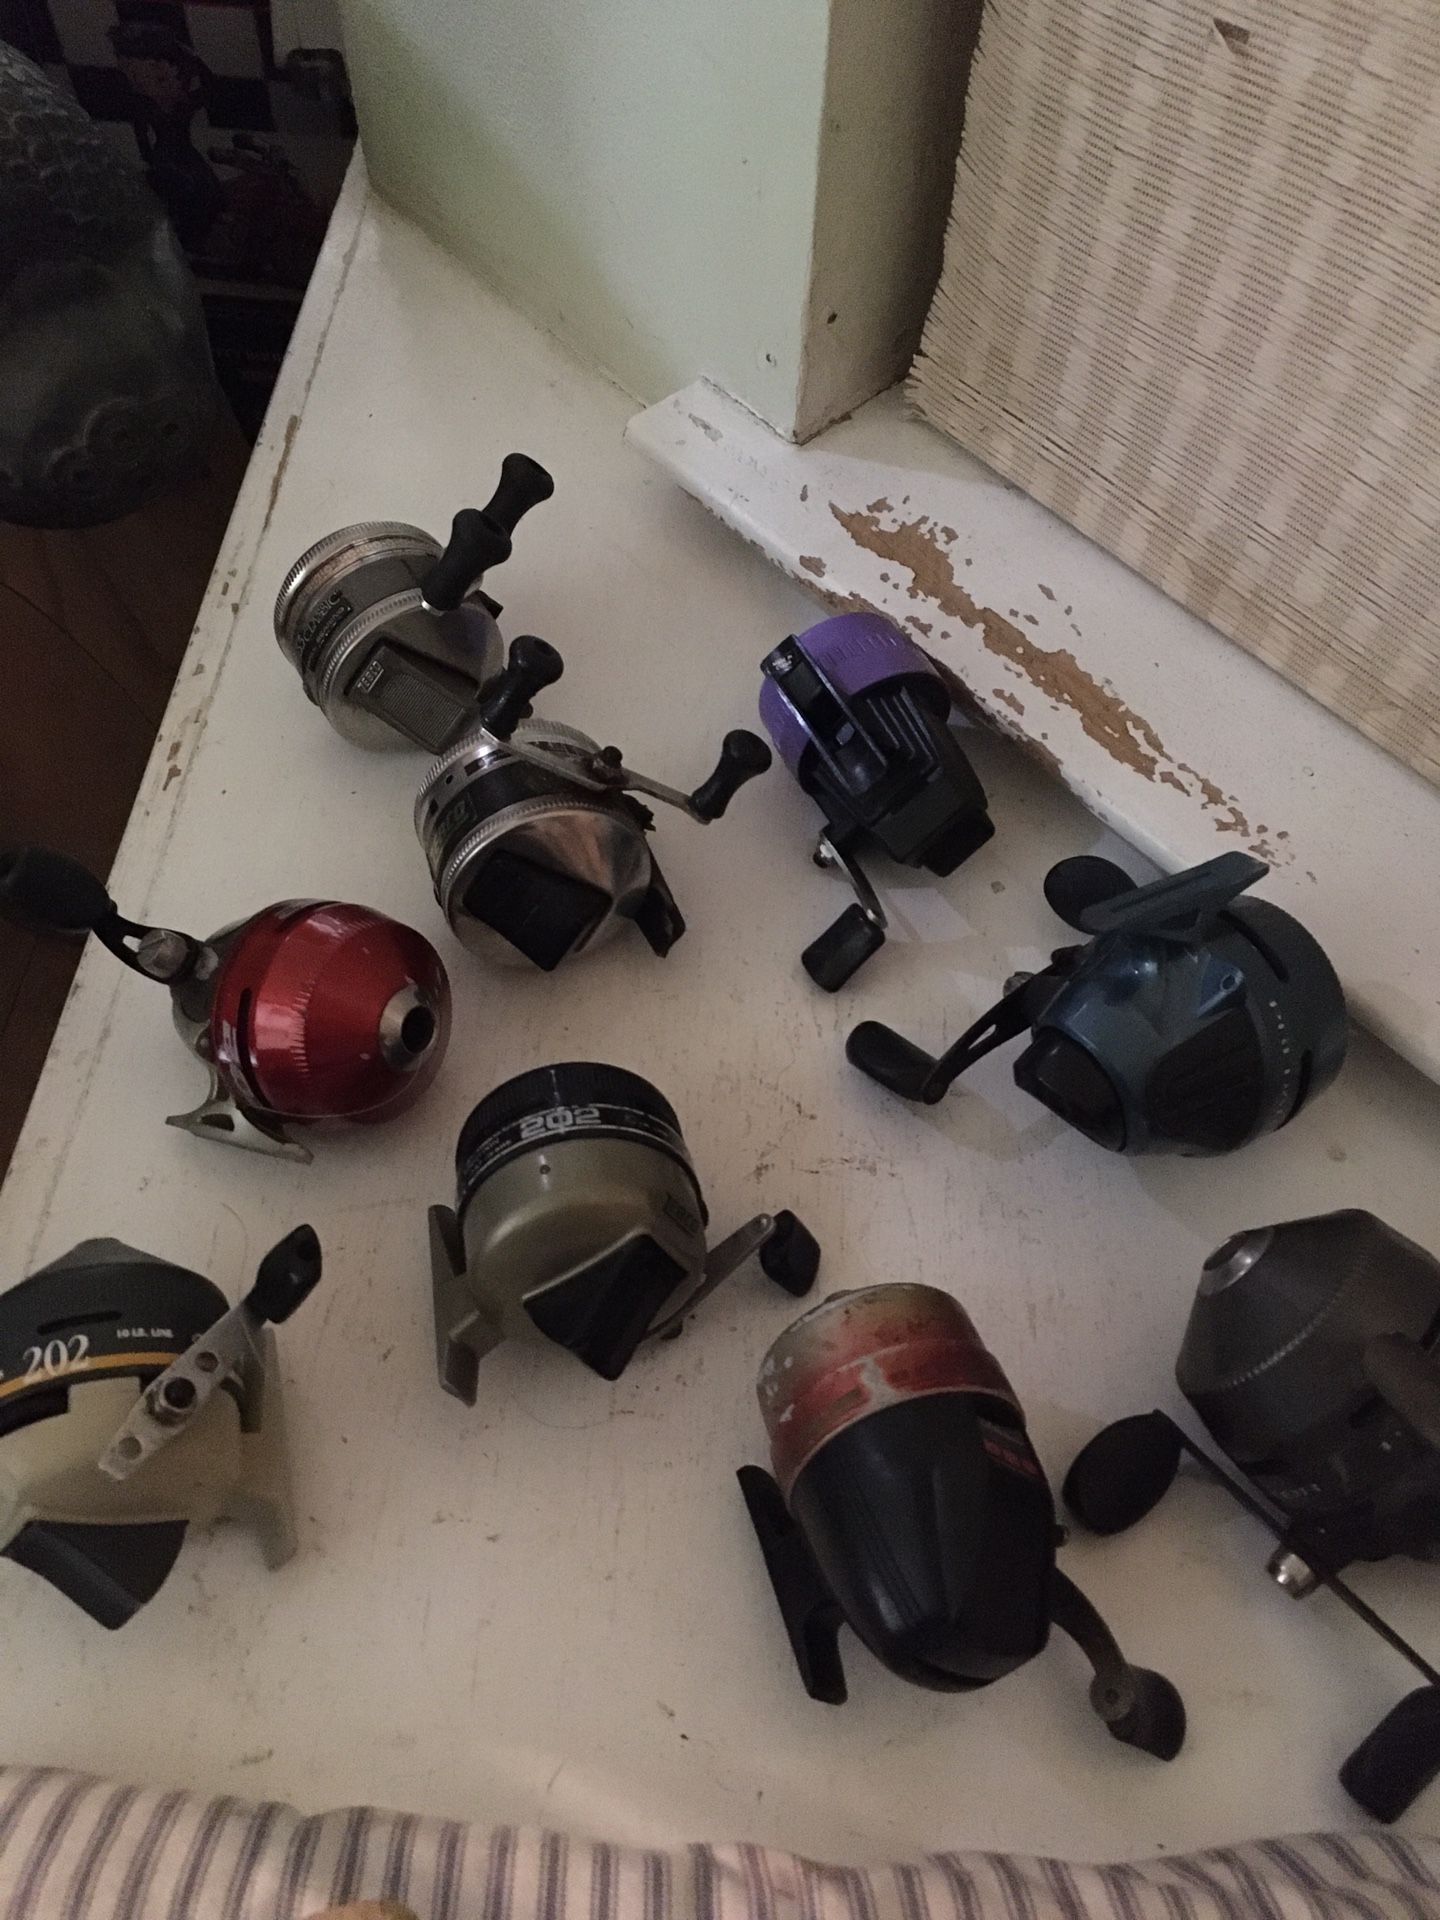 9 fishing reels spinning reels in picture Zebco, Shakespeare and one free kids reel